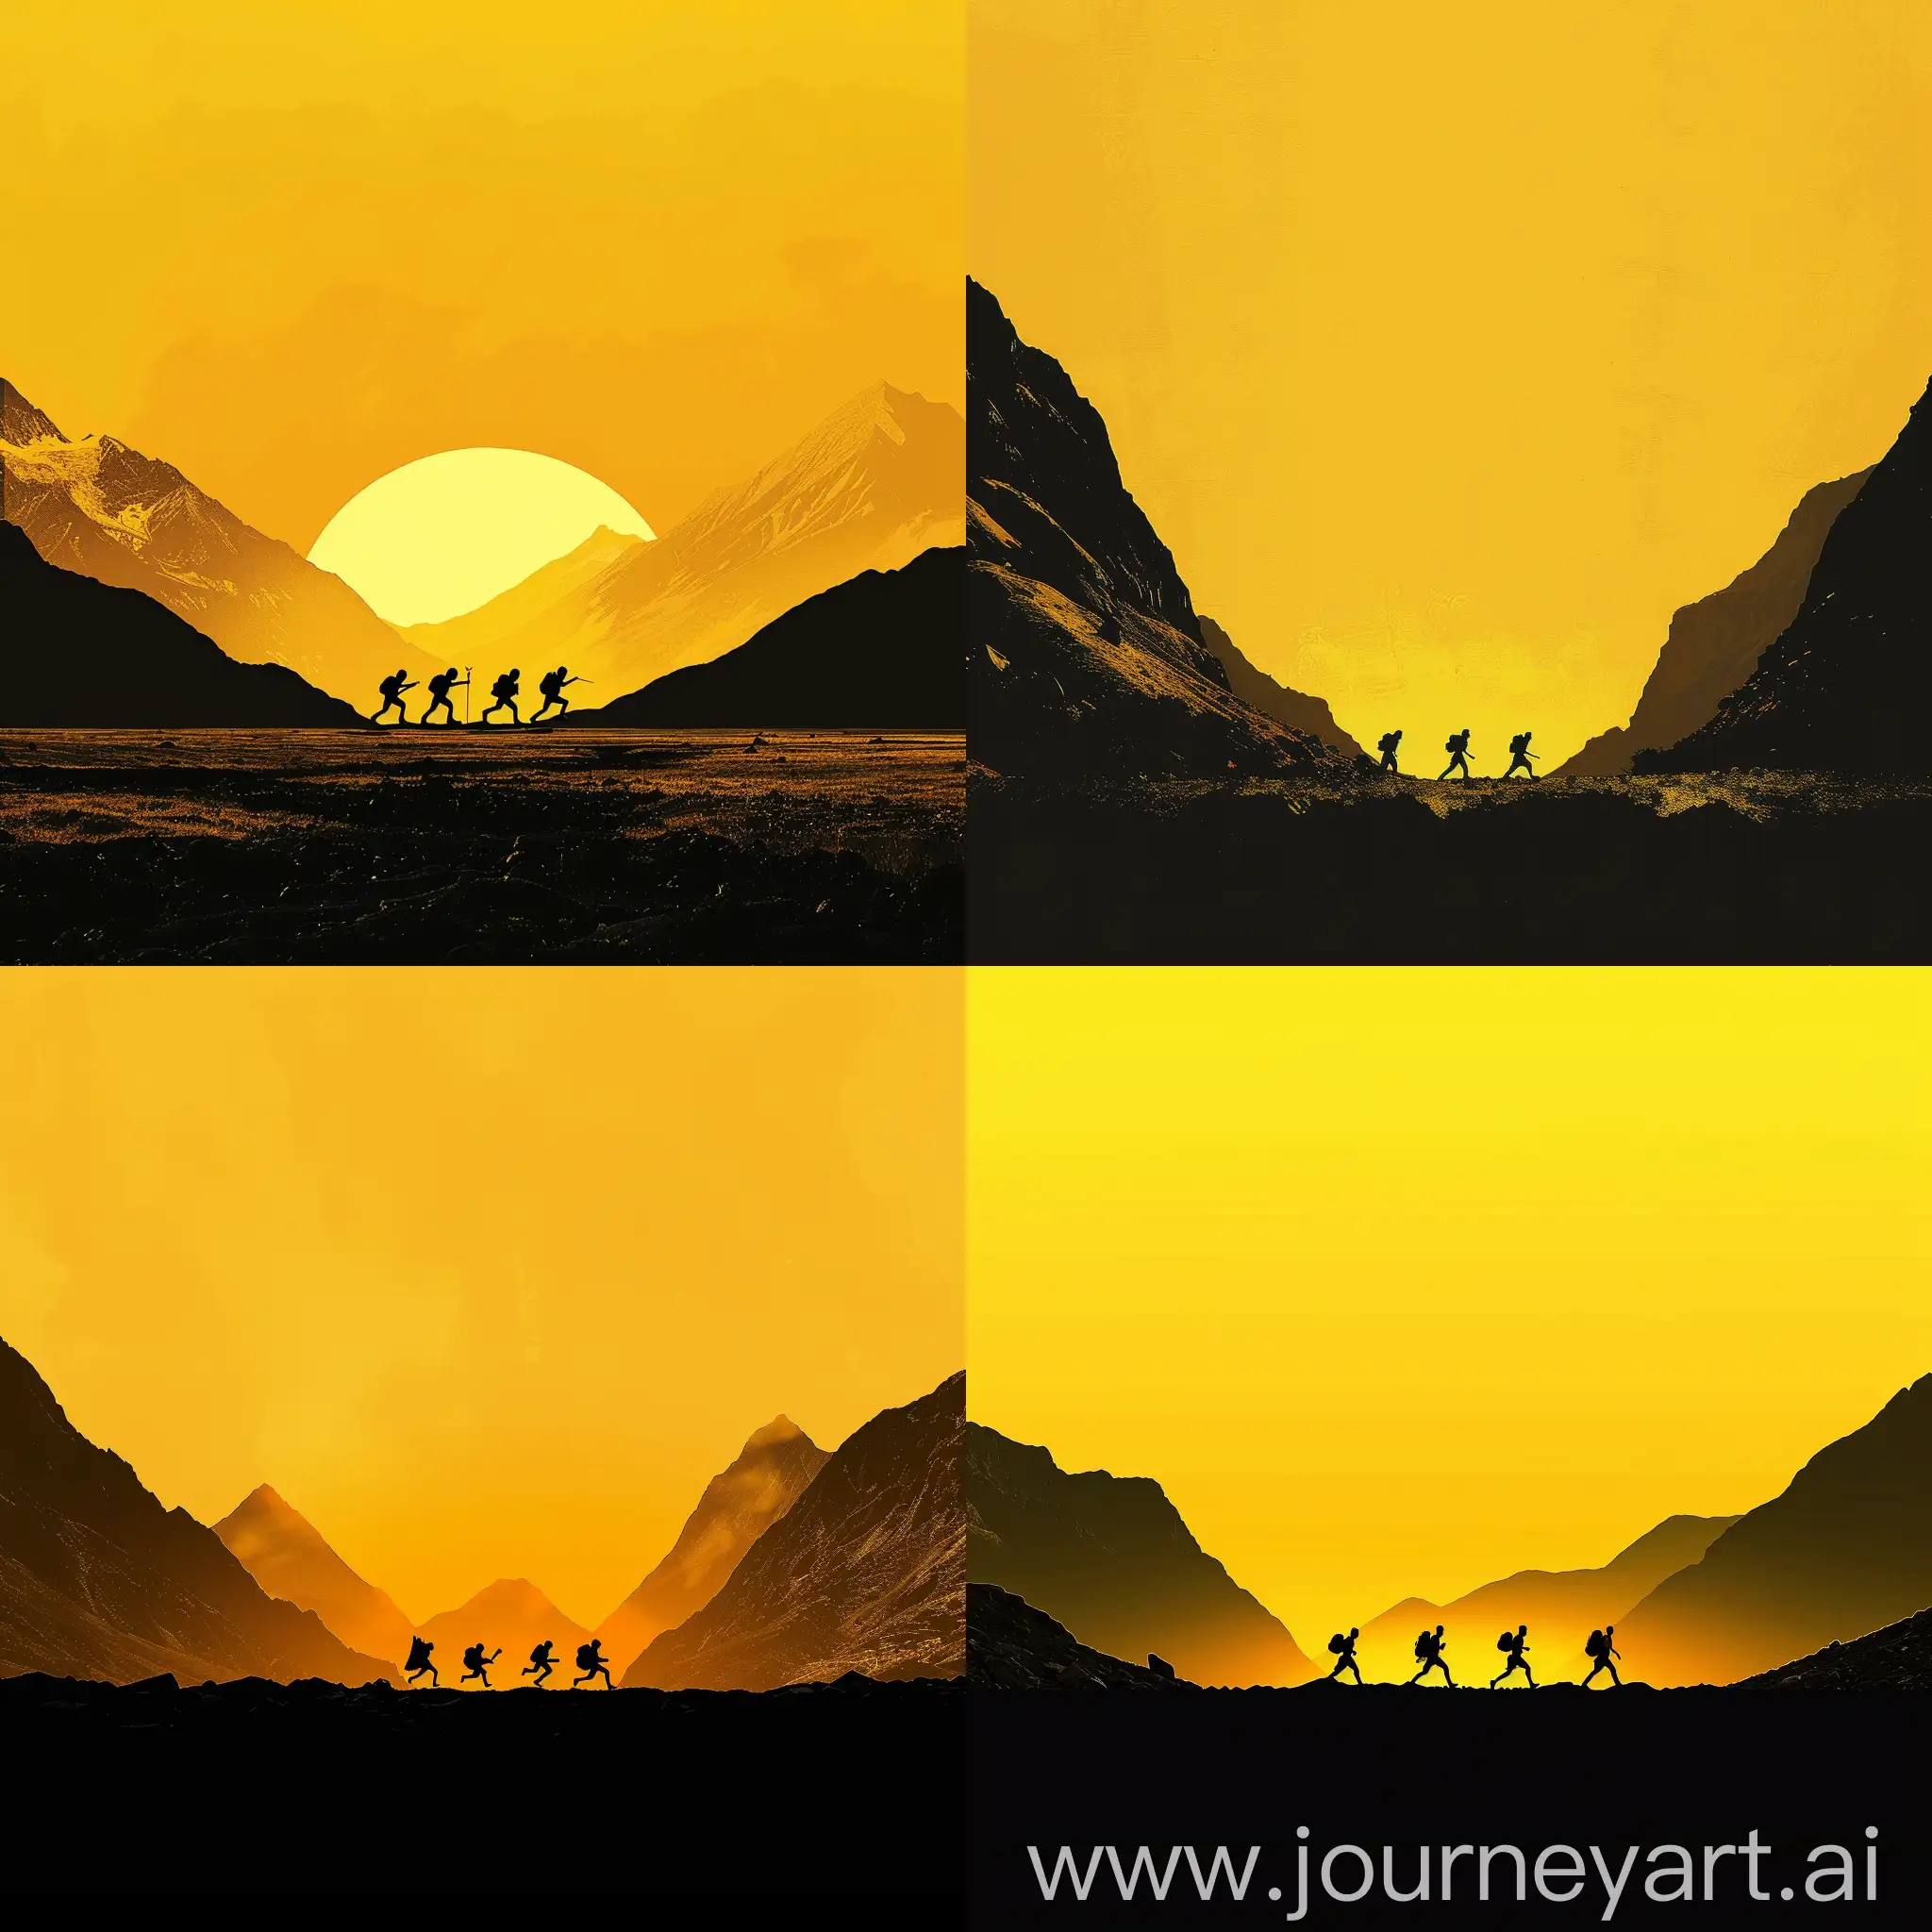 yellow-orange clear sunset, mountains left and right, silhouettes of four fantasy small travelers compared to the mountains in the center running to right, front view, beneath image black earth, side view